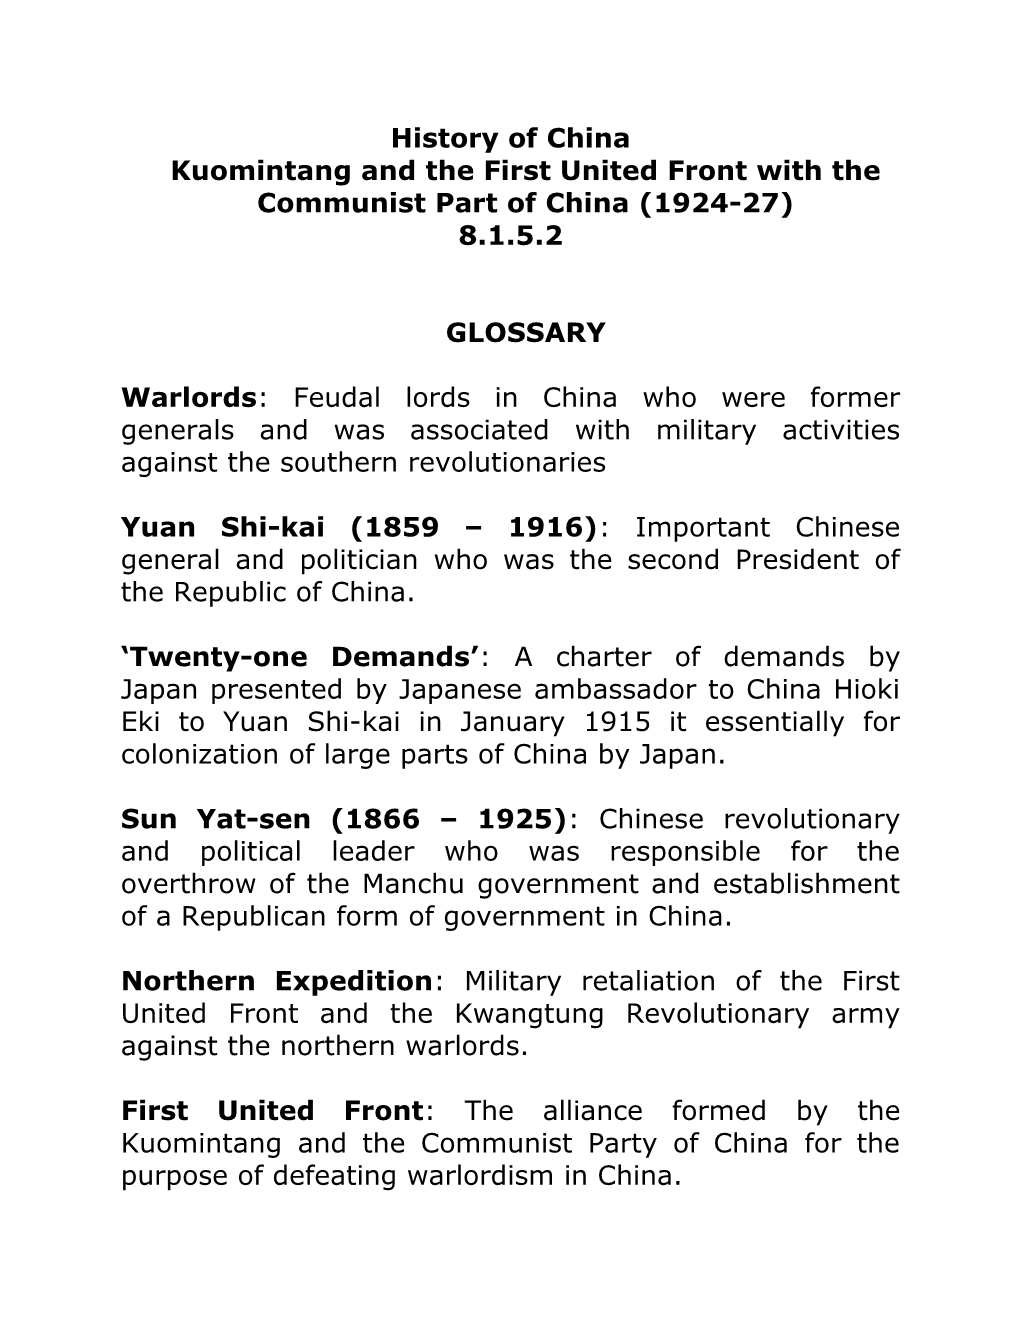 Kuomintang and the First United Front with the Communist Part of China (1924-27)